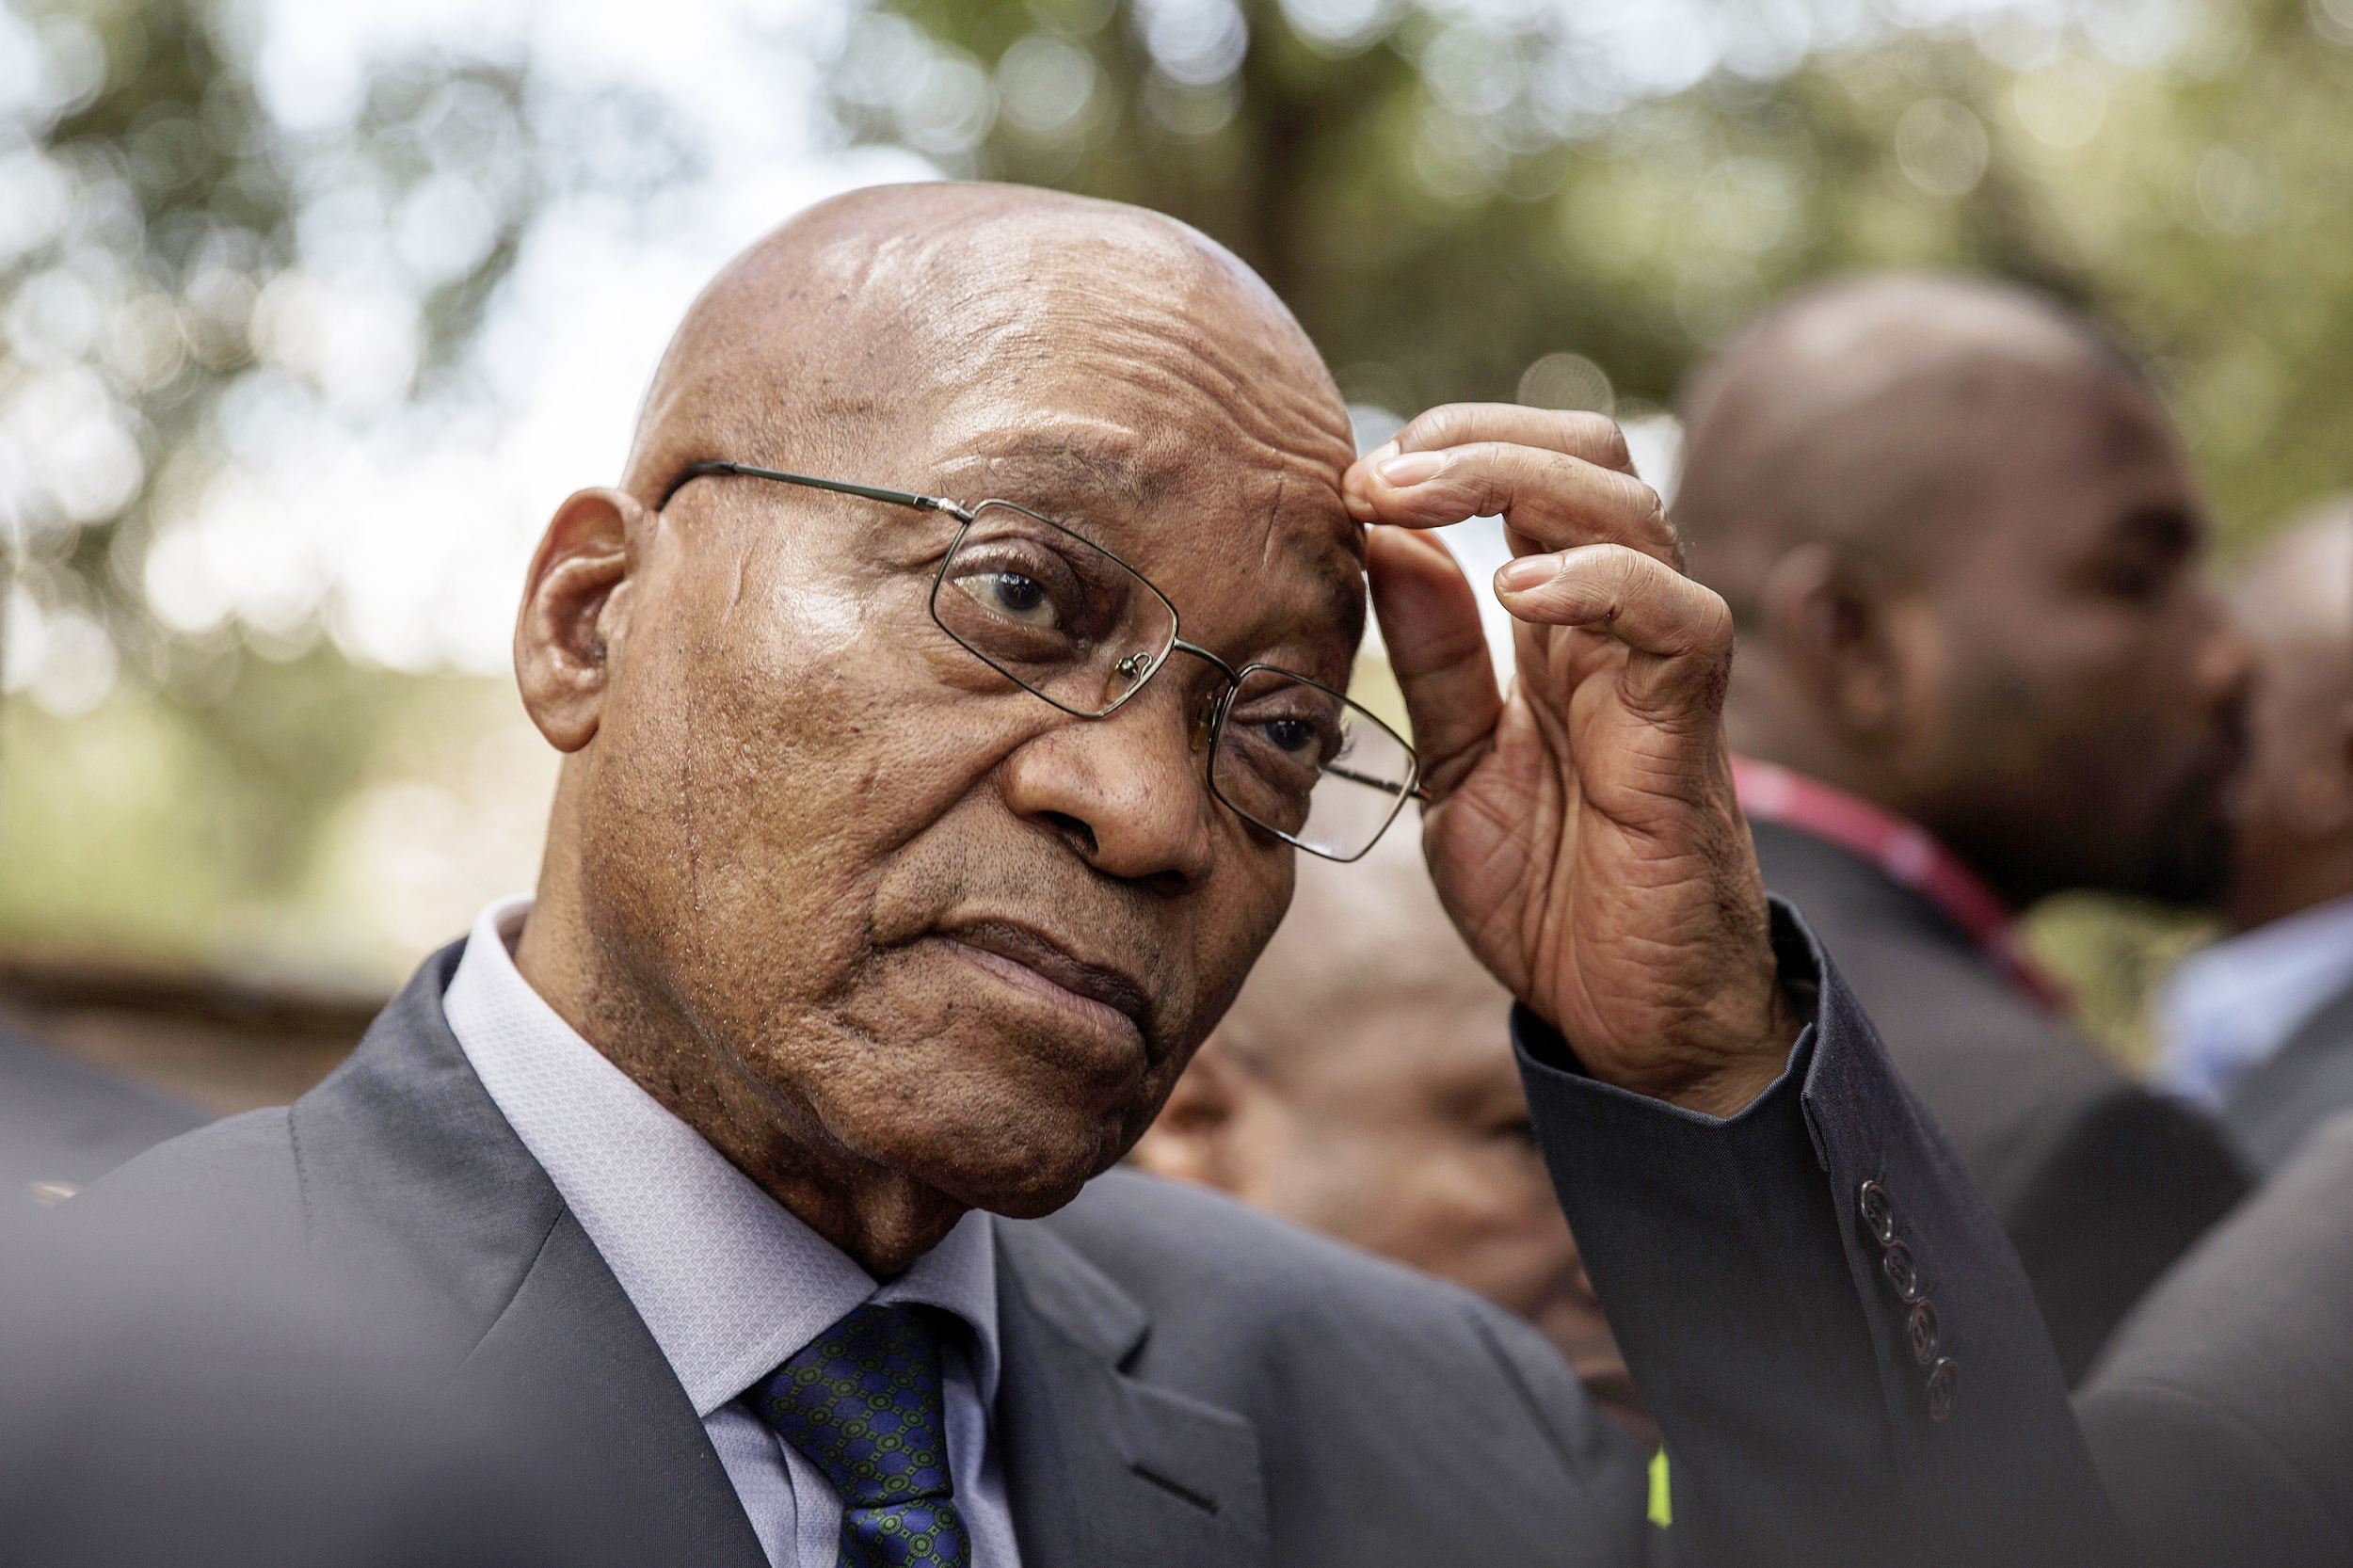 The South African economy will be bolstered if Zuma falls ...